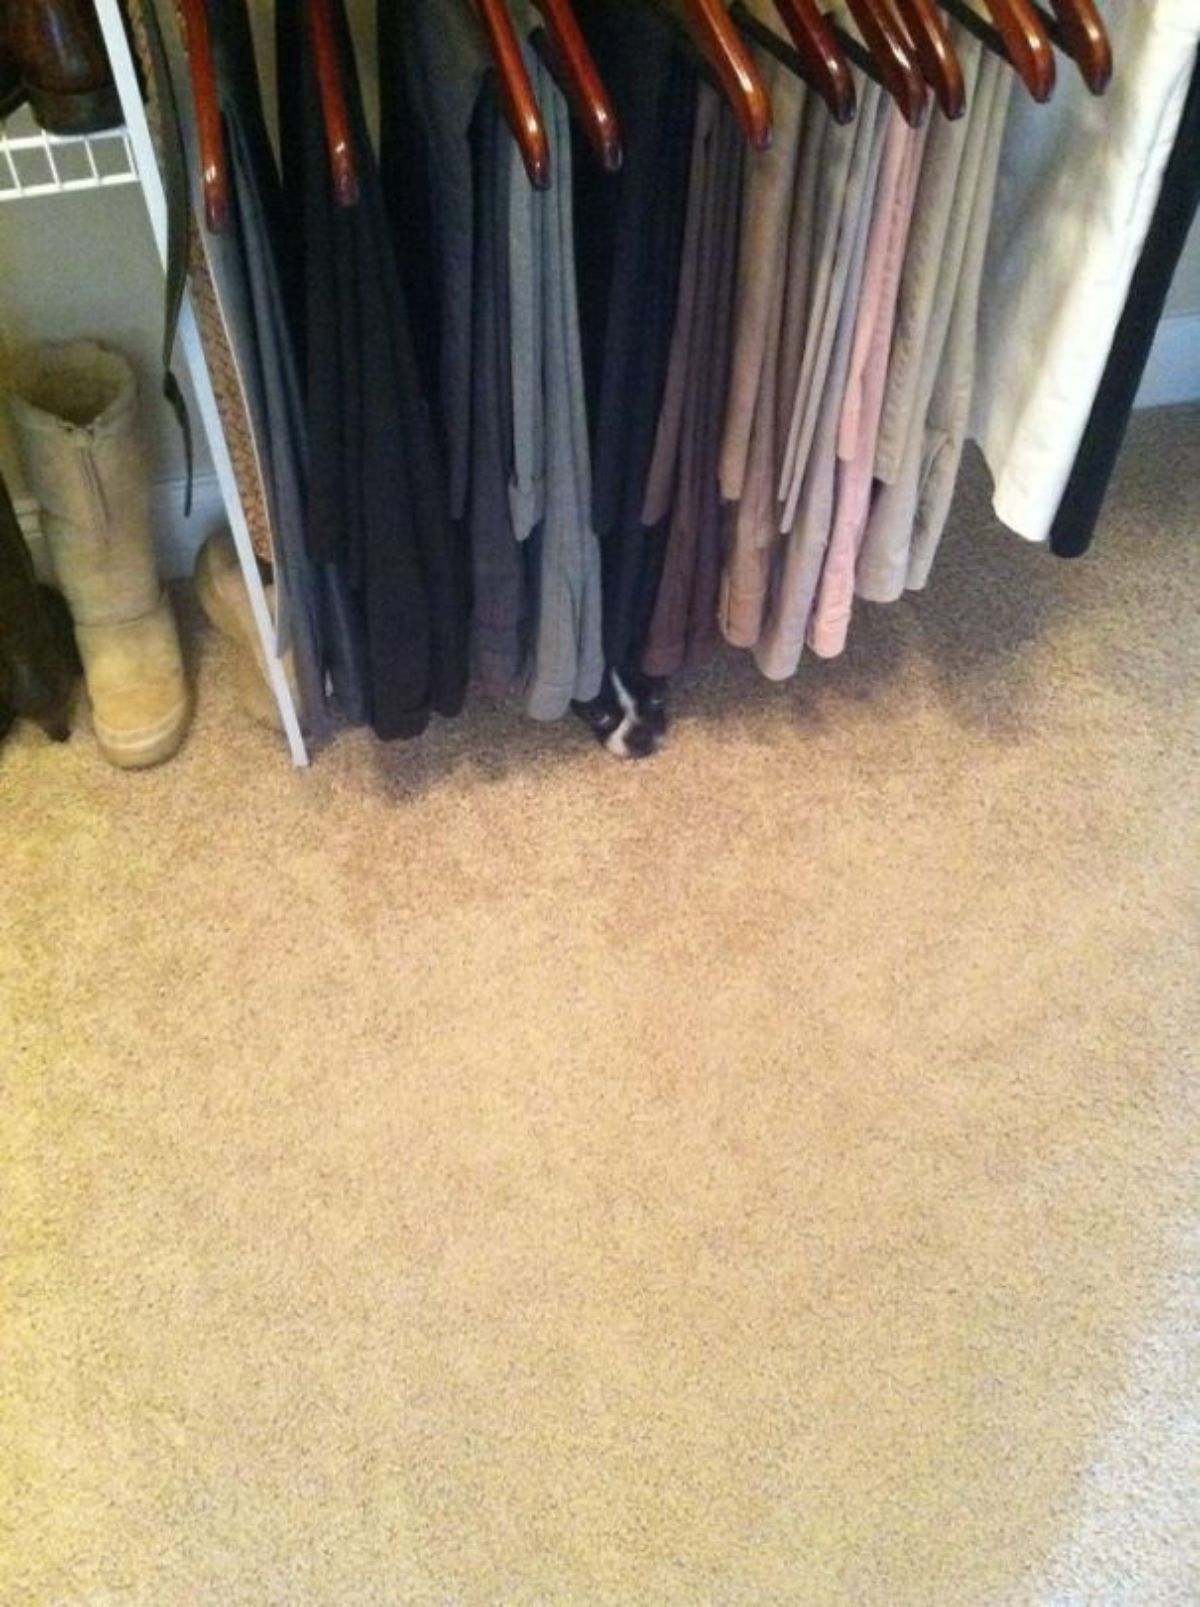 black and white dog laying on the floor under a bunch of clothes hanging from a rack